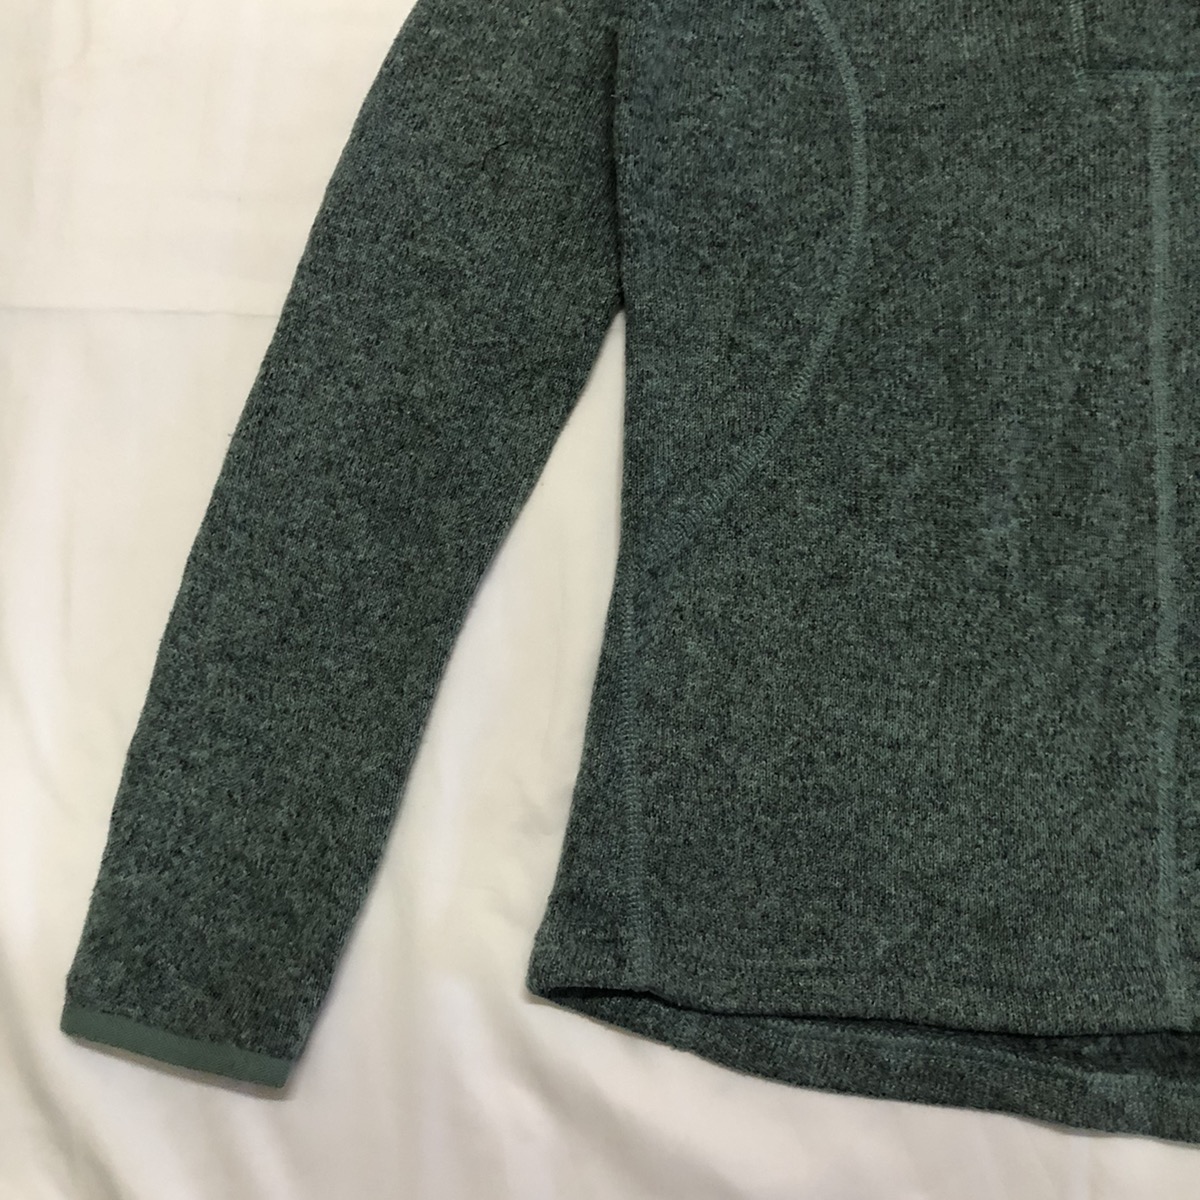 The North Face sweater fleece 1/4 toggle button - 4